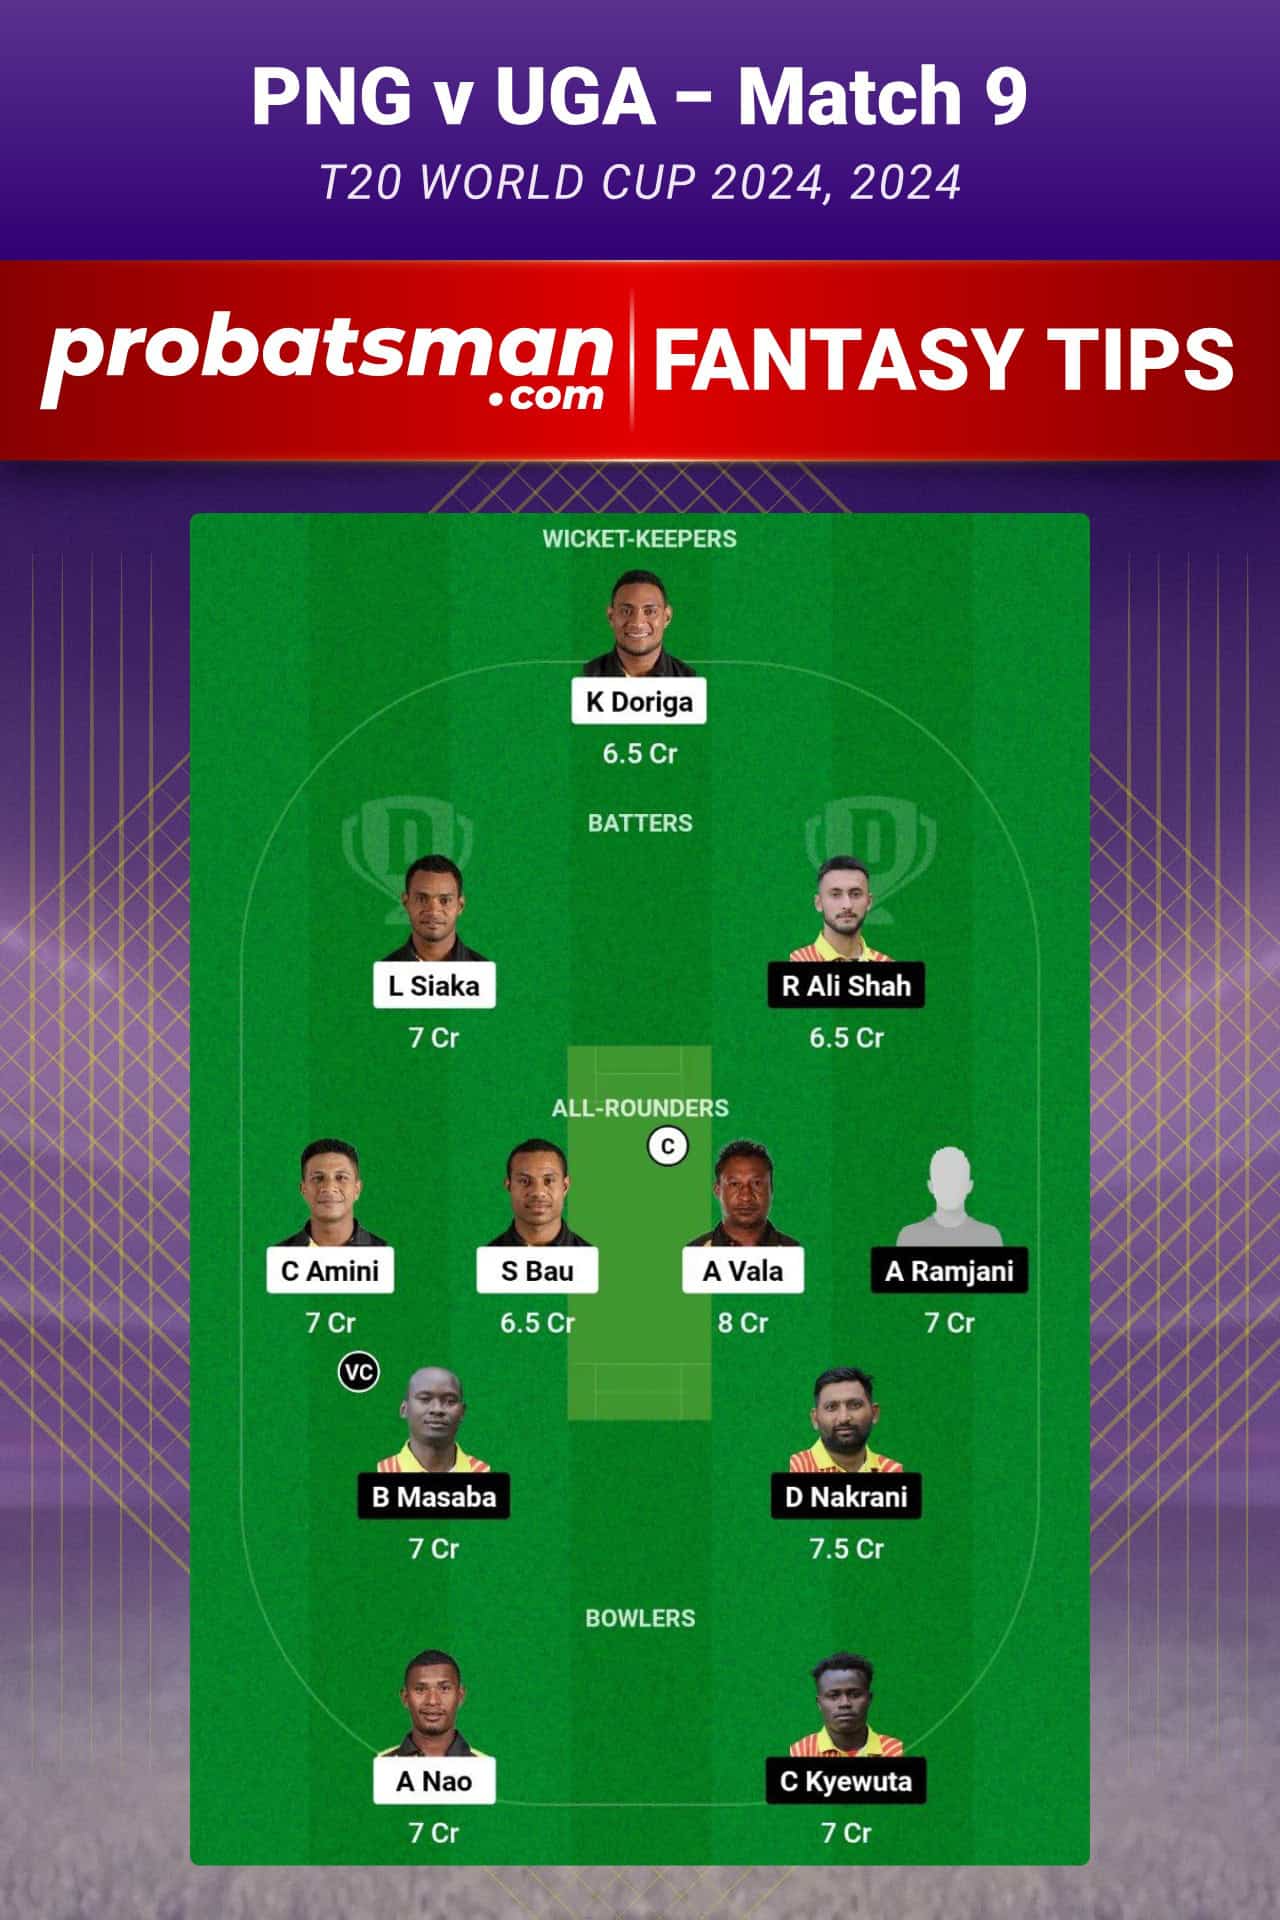 PNG vs UGA Dream11 Prediction For Match 9 of T20 World Cup 2024